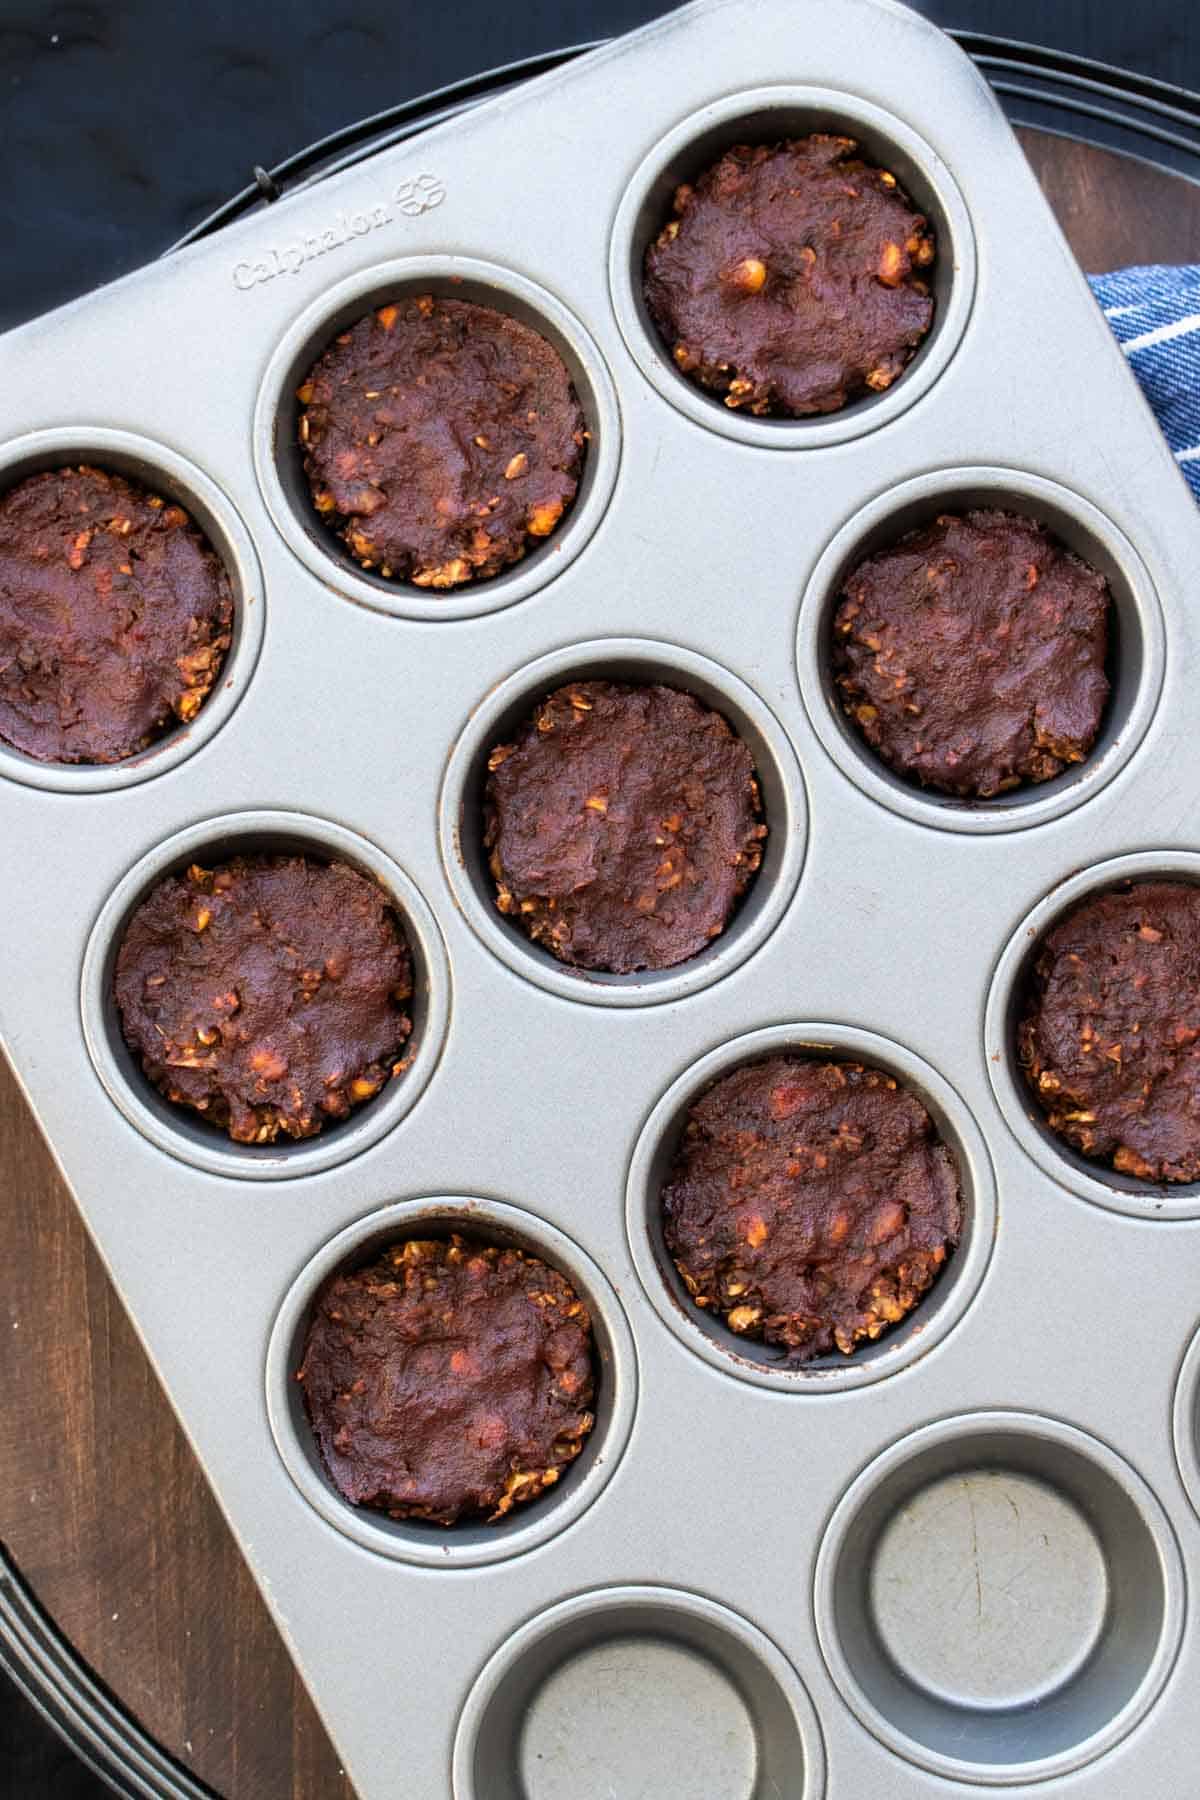 Vegan lentil meatloaf put into muffin tins and topped with barbecue sauce and baked.